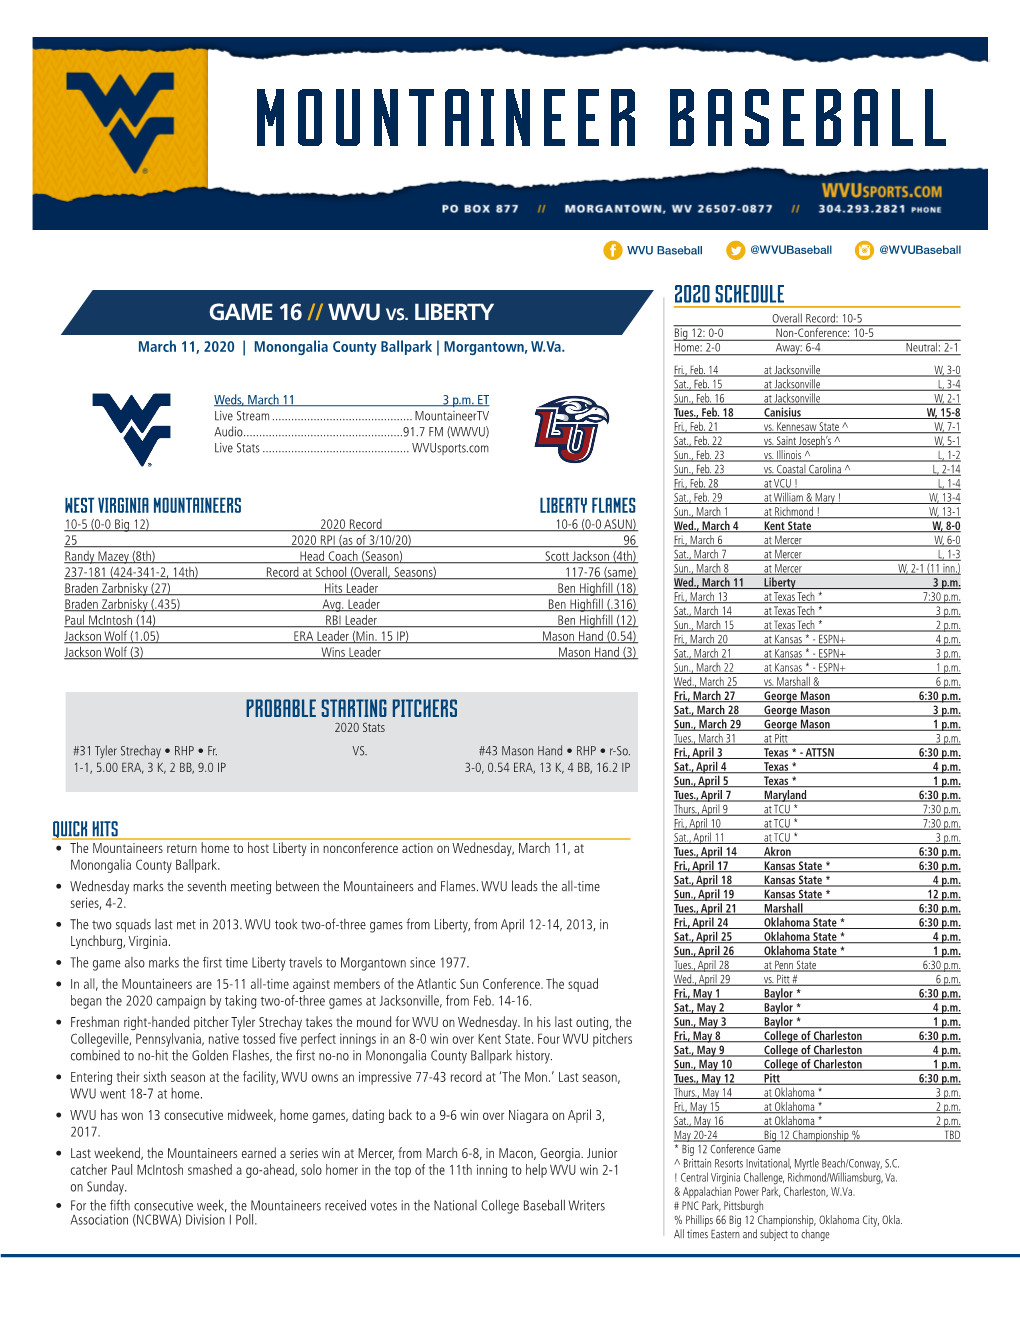 2020 Schedule Game 16 //Wvu Vs. Liberty Probable Starting